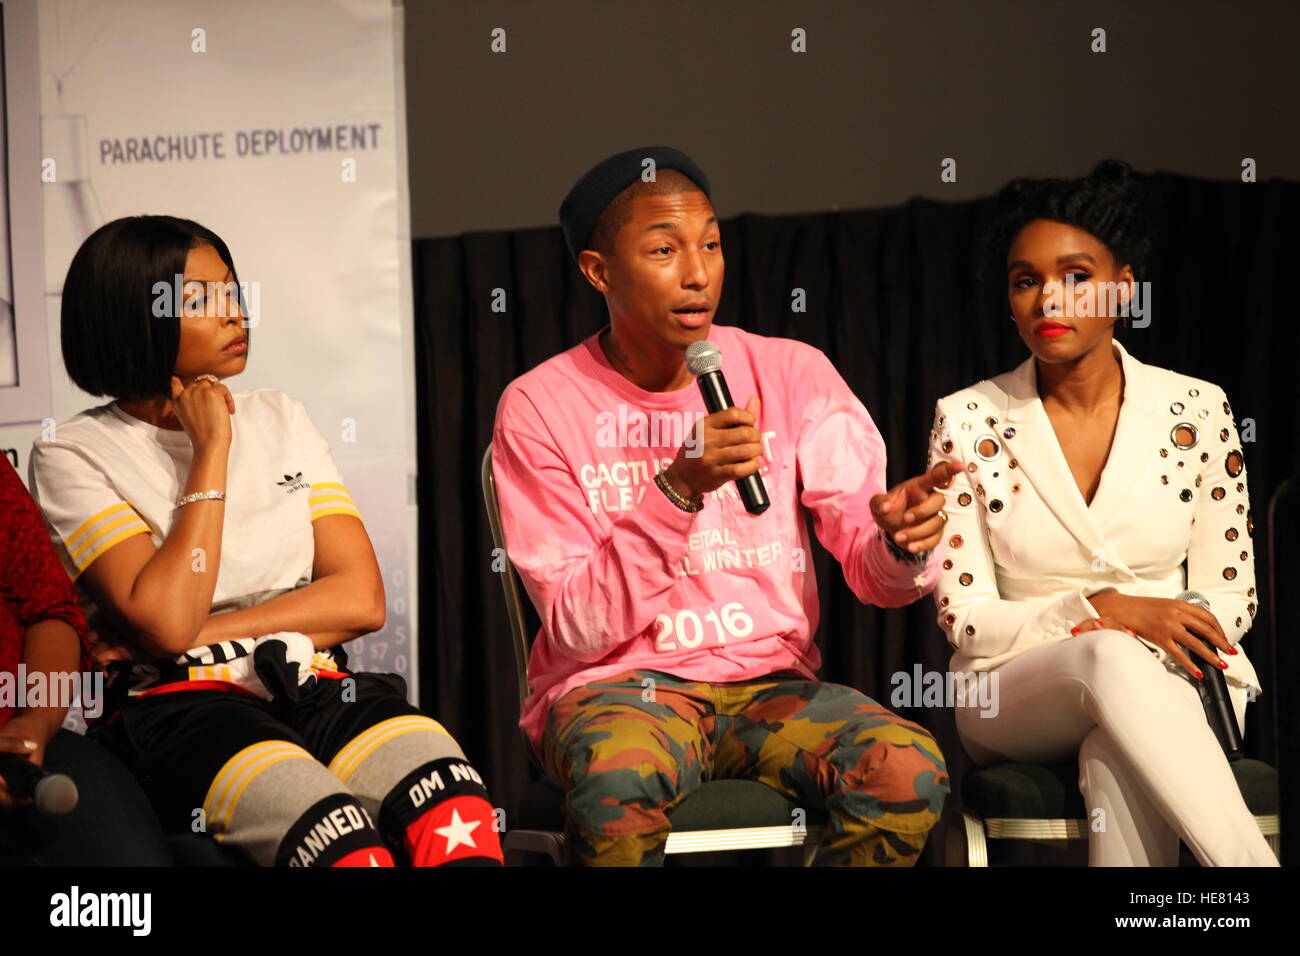 Cast and crew members of the upcoming film Hidden Figures (L-R) actress Taraji P. Henson, musician Pharrell Williams, and actress Janelle Monae participate in a question and answer session about the film at the Kennedy Space Center Visitor Complex IMAX Theater December 12, 2016 in Merritt Island, Florida. The film is based on the African-American women who worked on the NASA Project Mercury missions in 1962. Stock Photo